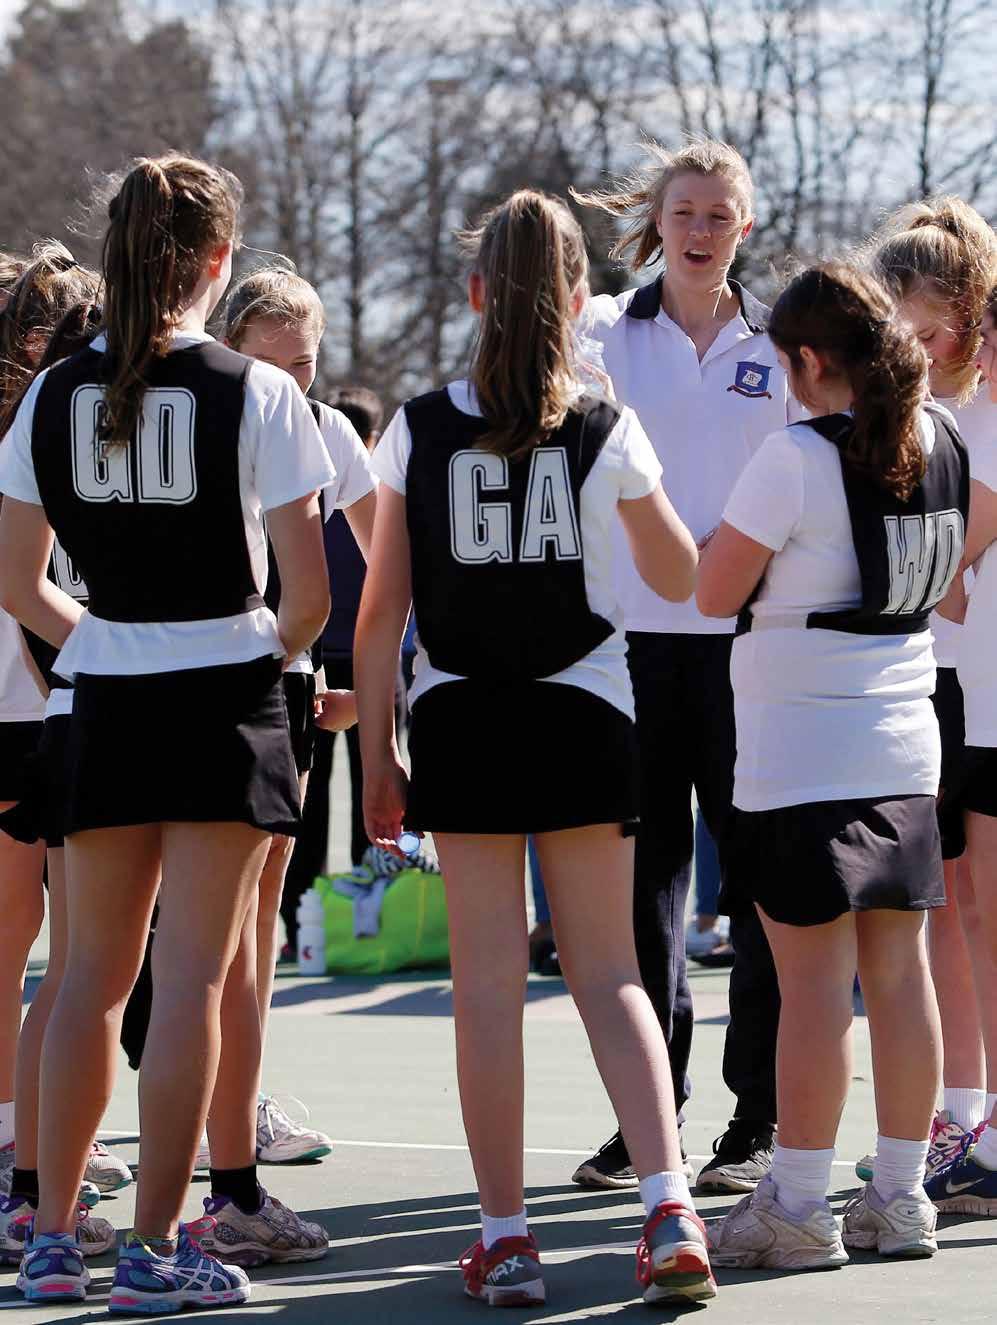 GLOSSARY OF TERMS GLOSSARY OF TERMS Players Anyone participating in netball programs, competitions, or activities (i.e. at any age, at any level and in any place).